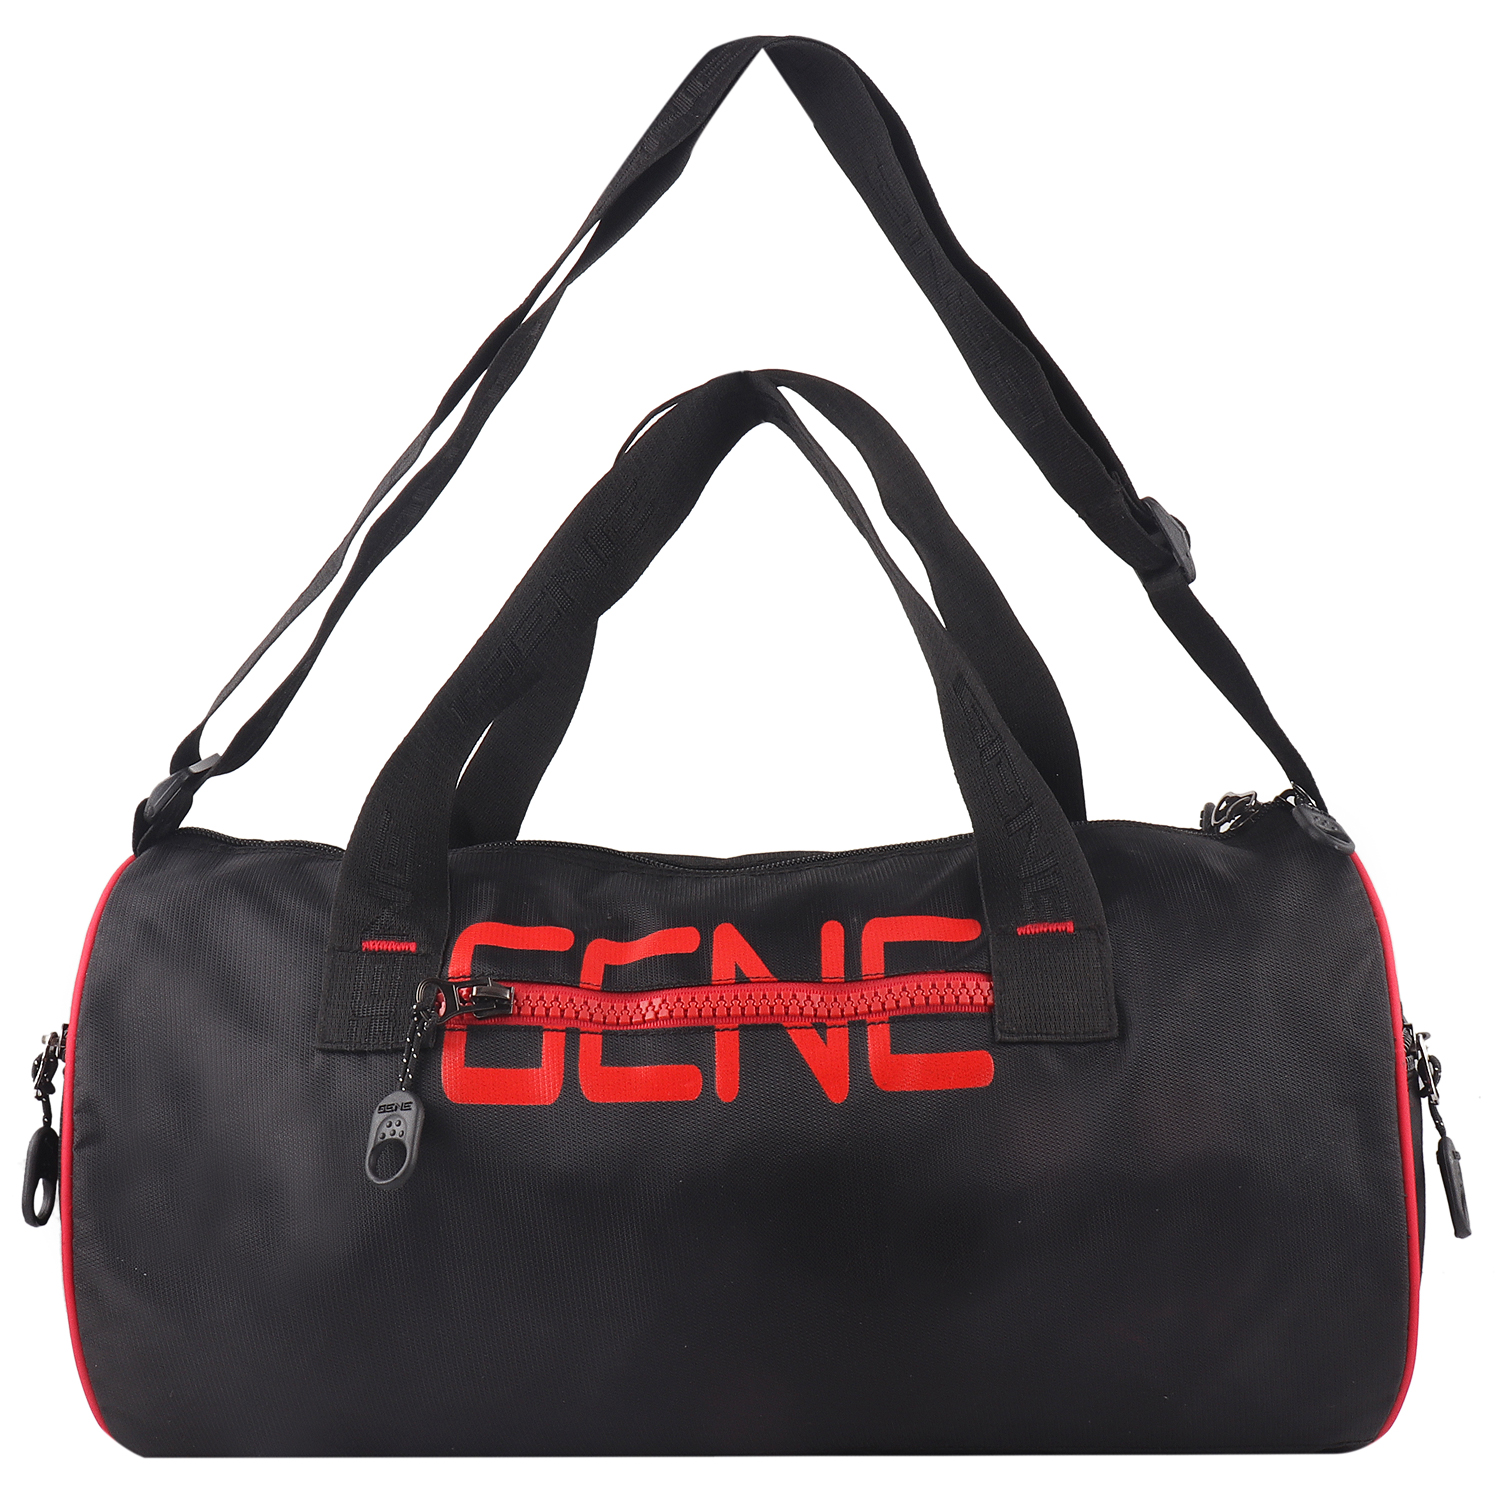 Buy Gene Bags® MN-331 Duffle Gym Bag with Shoe Cave | Capacity- 28 Liters  (Black) at Amazon.in